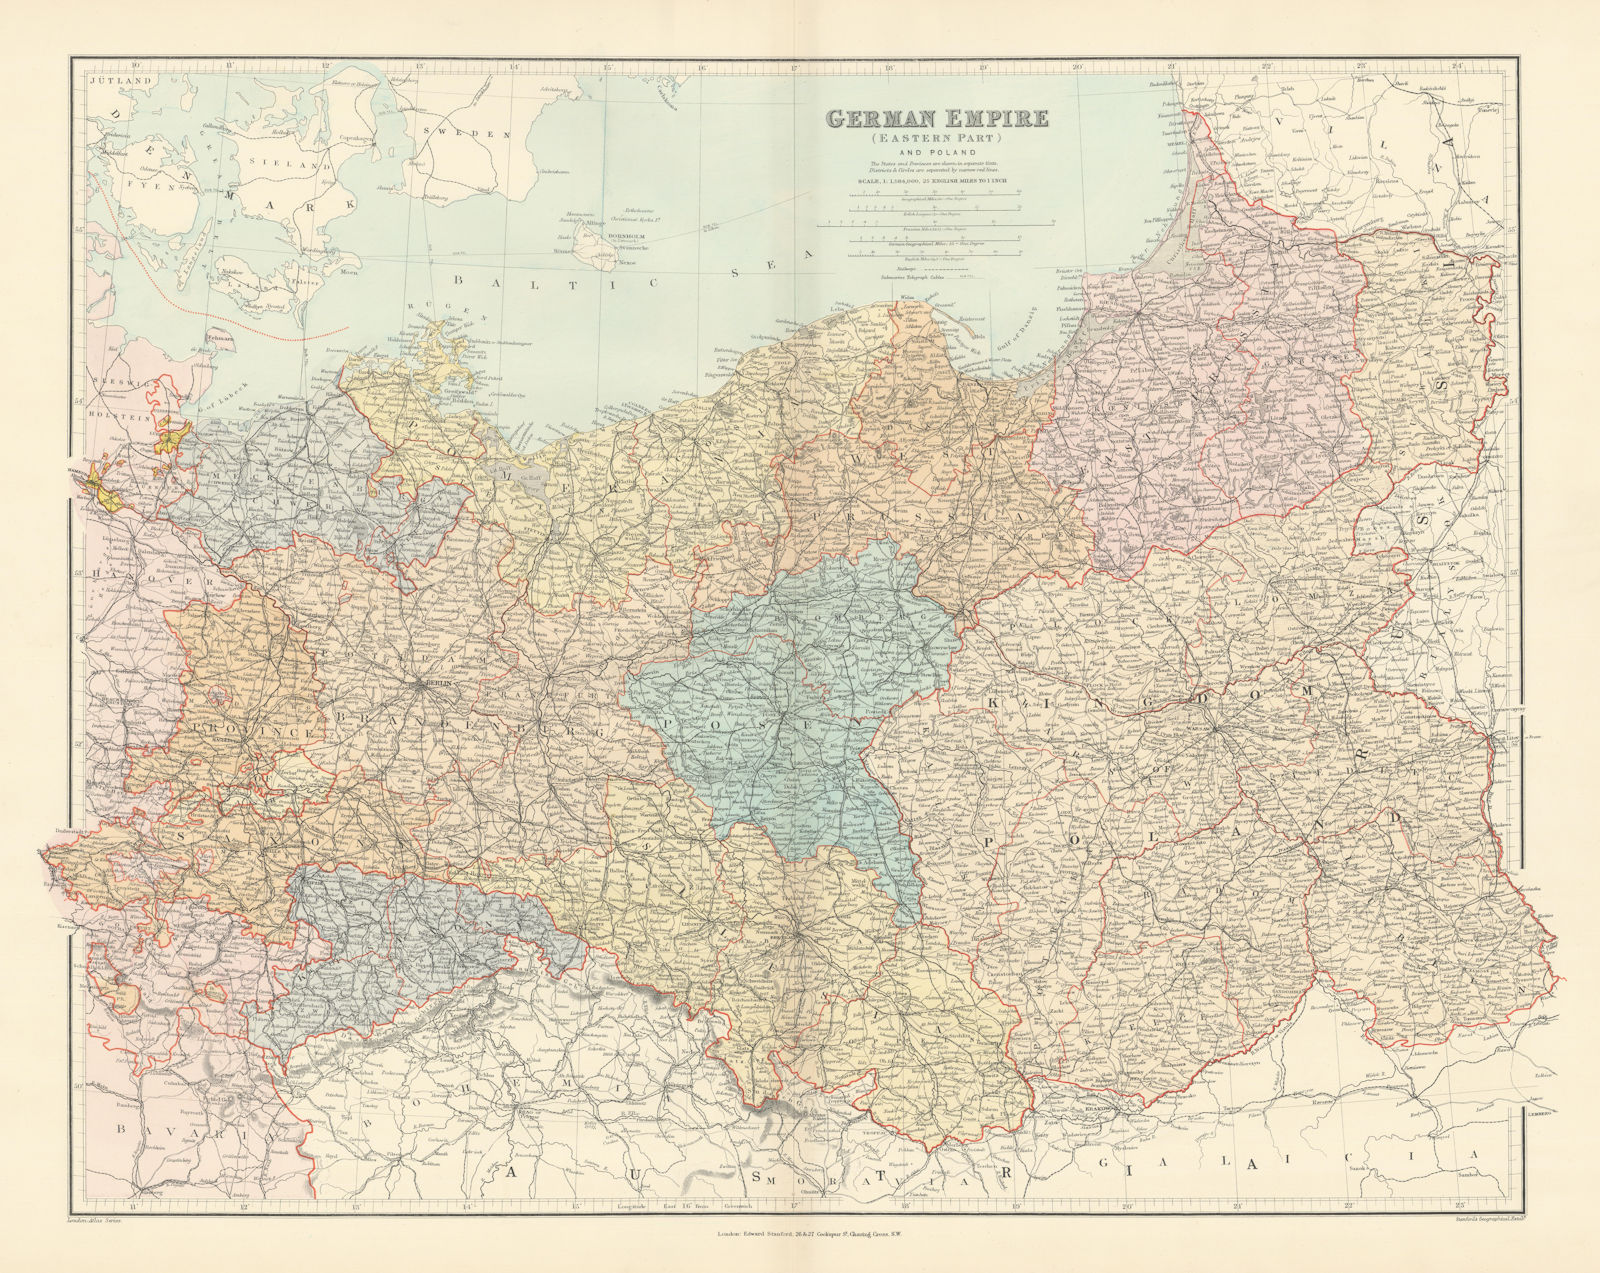 Associate Product German Empire (eastern part) and Poland. Large 66x52cm. STANFORD 1896 old map